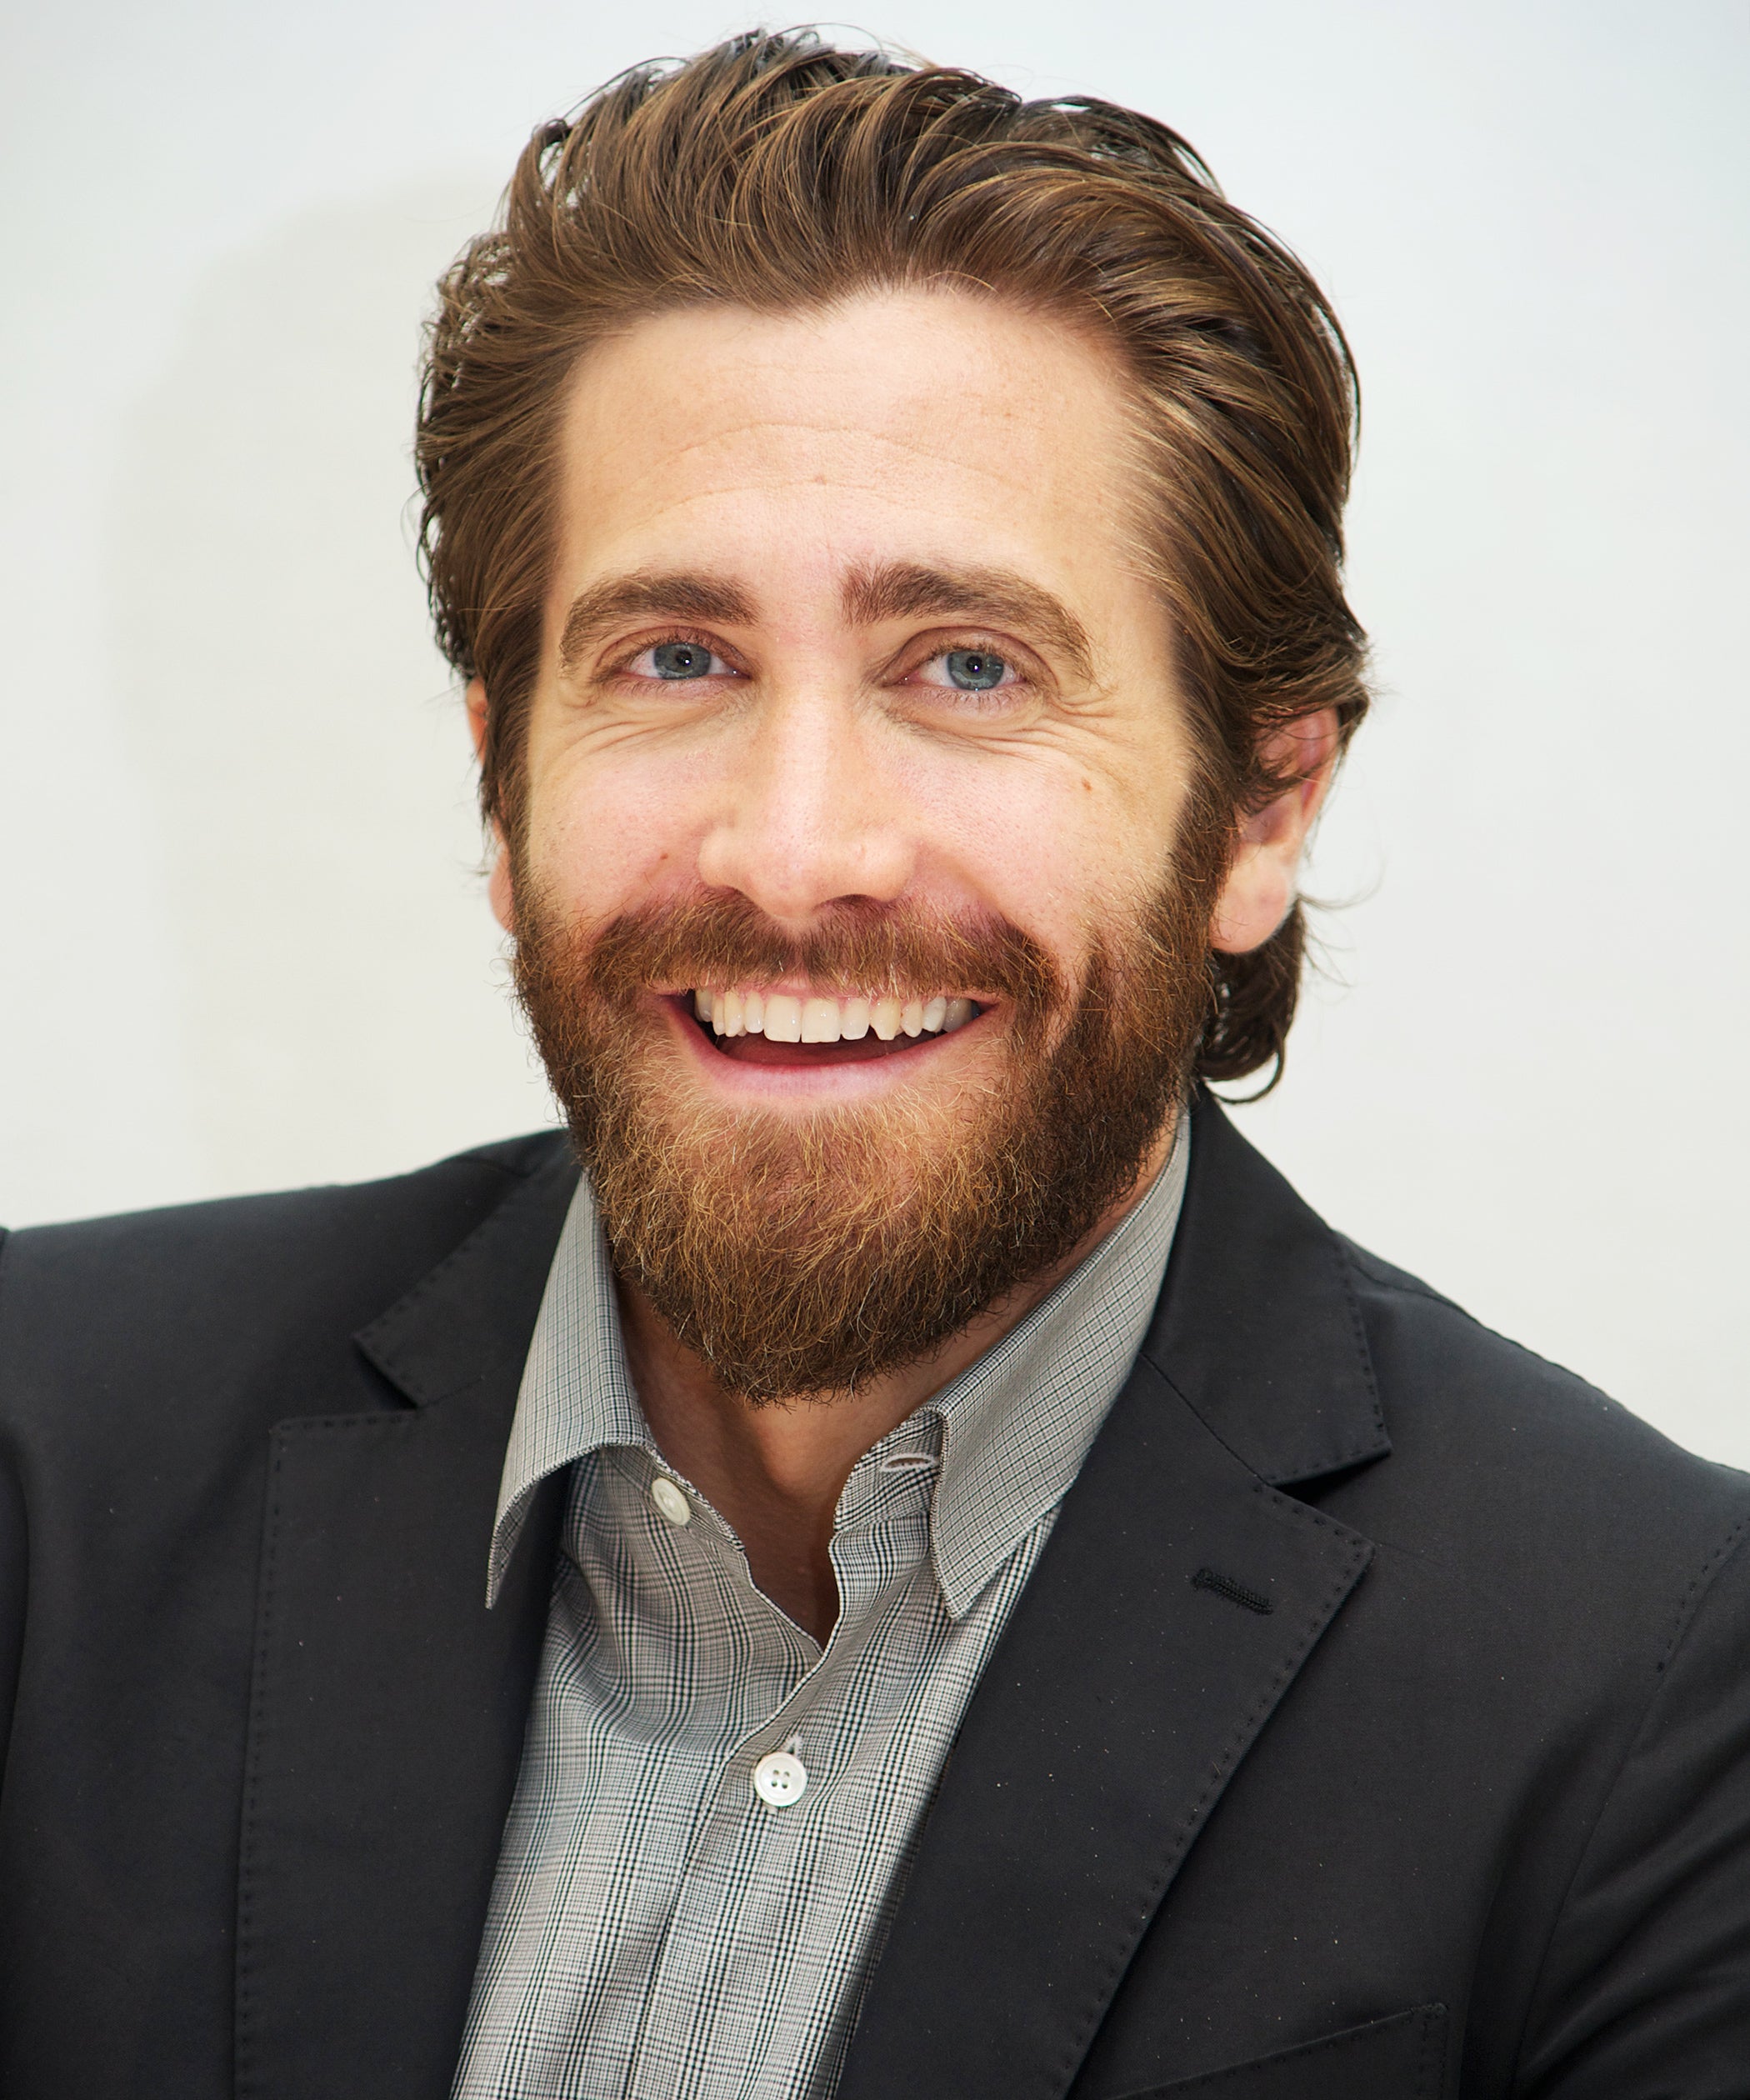 Let's All Take a Moment to Appreciate Jake Gyllenhaal's Hair Journey | GQ